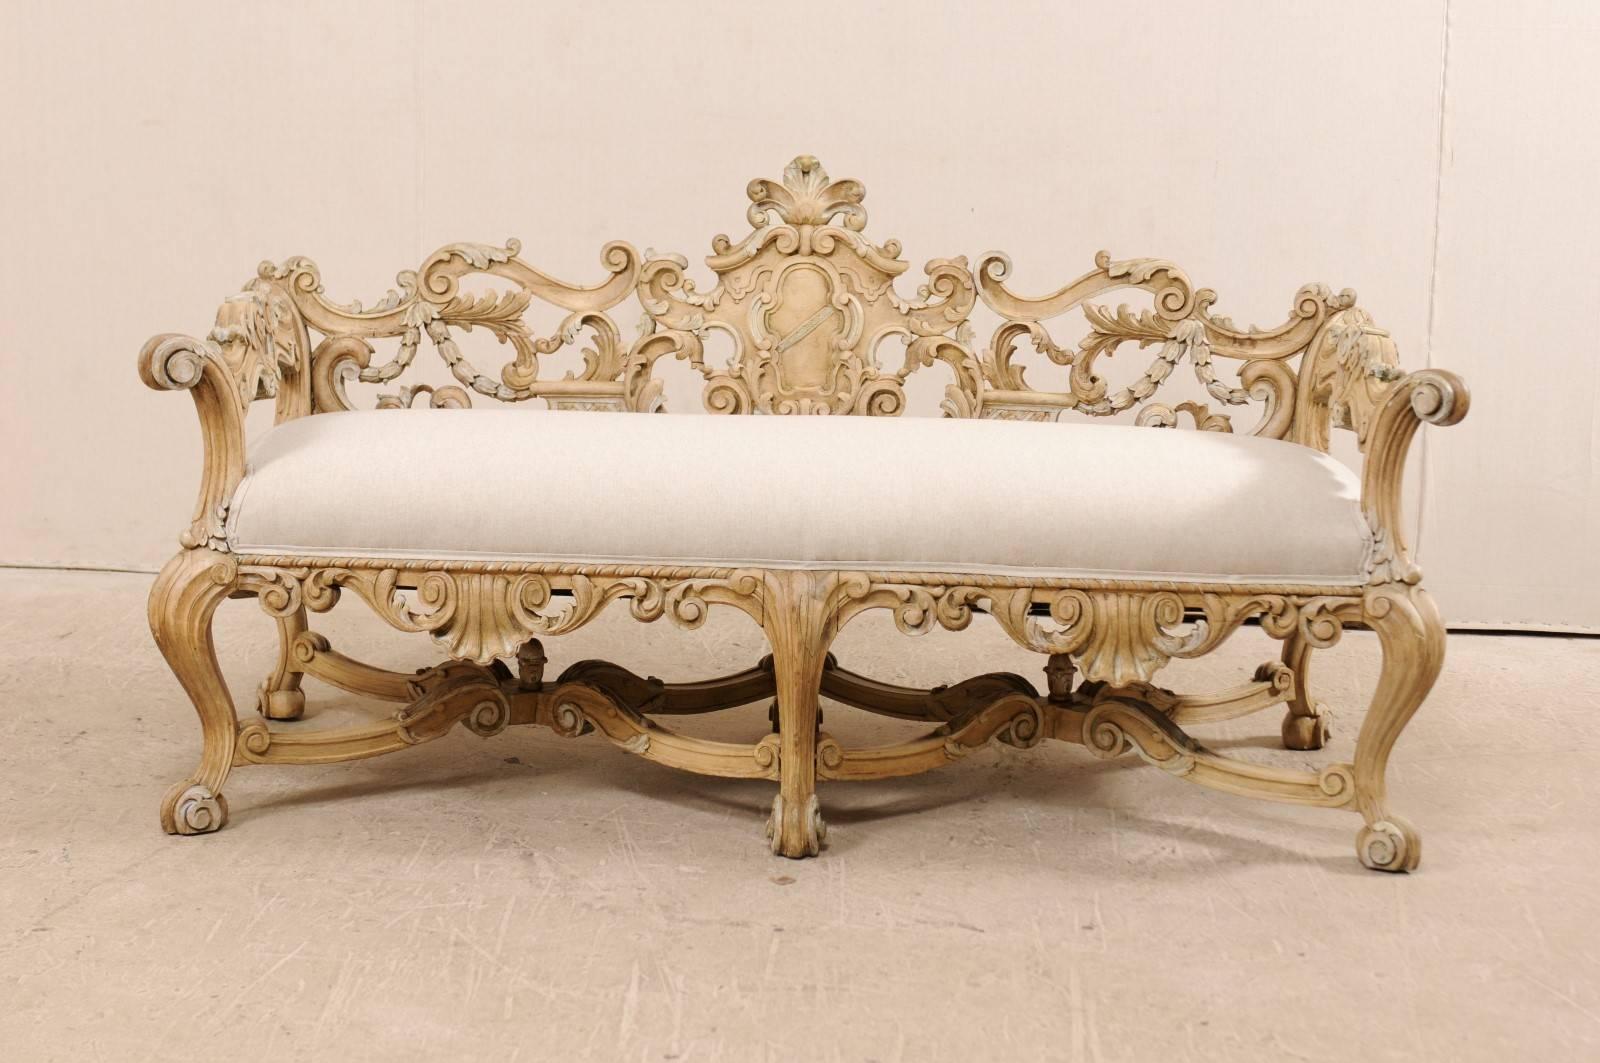 An exquisite, richly carved Italian wooden bench from the 19th century with upholstered seat. This antique Italian Baroque style bench, circa 1880, features elaborate carvings throughout it's back and skirt in a shell, acanthus leaf, and floral